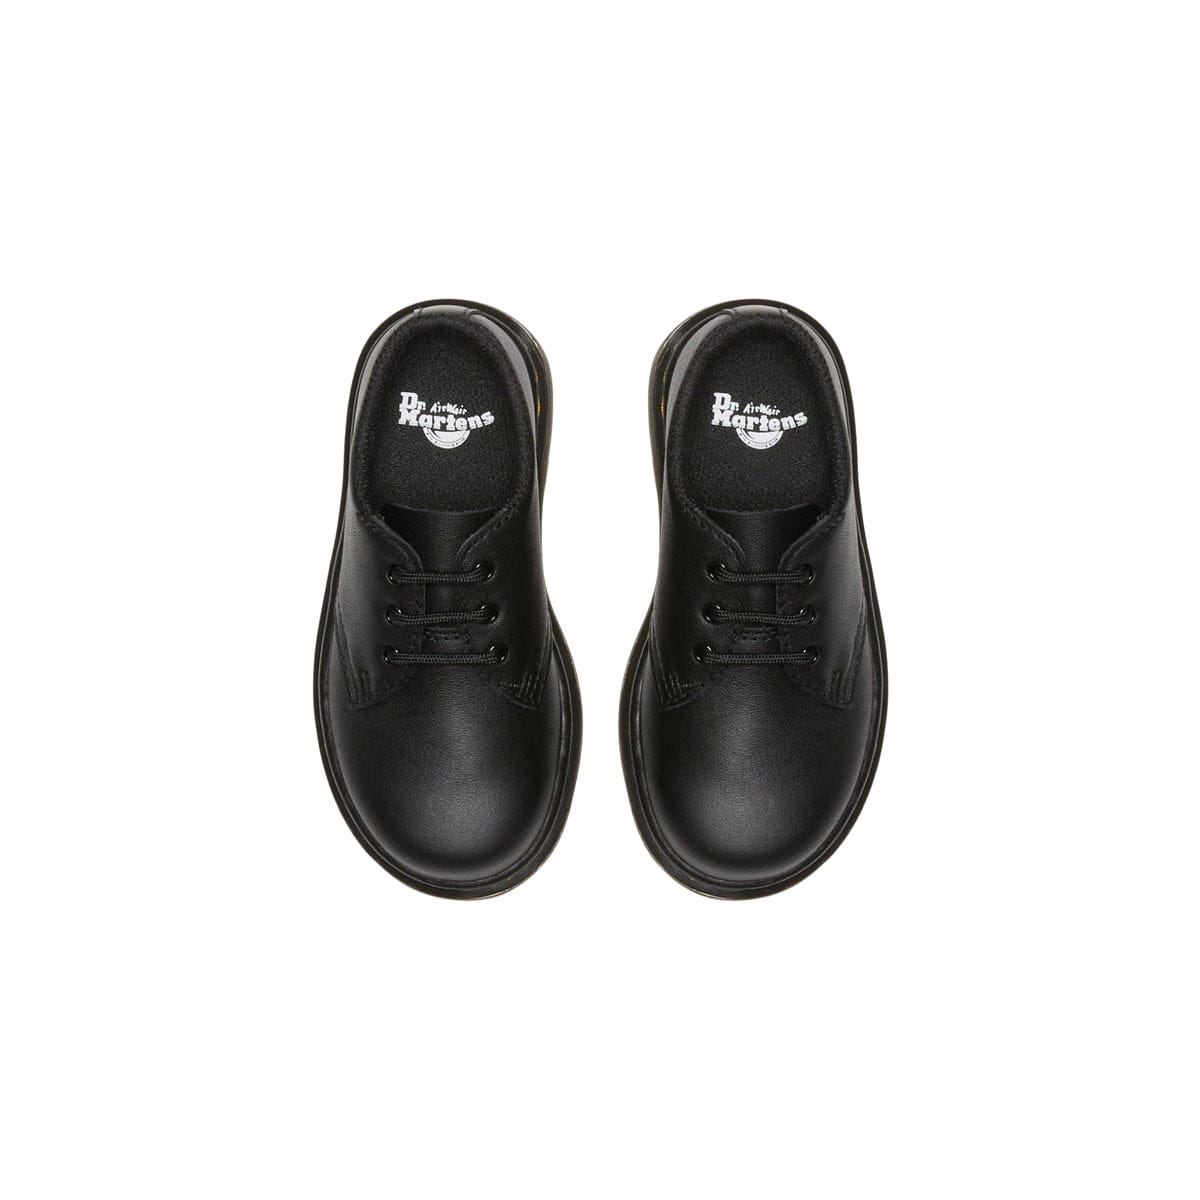 Dr. Martens Youth YOUTH 1461